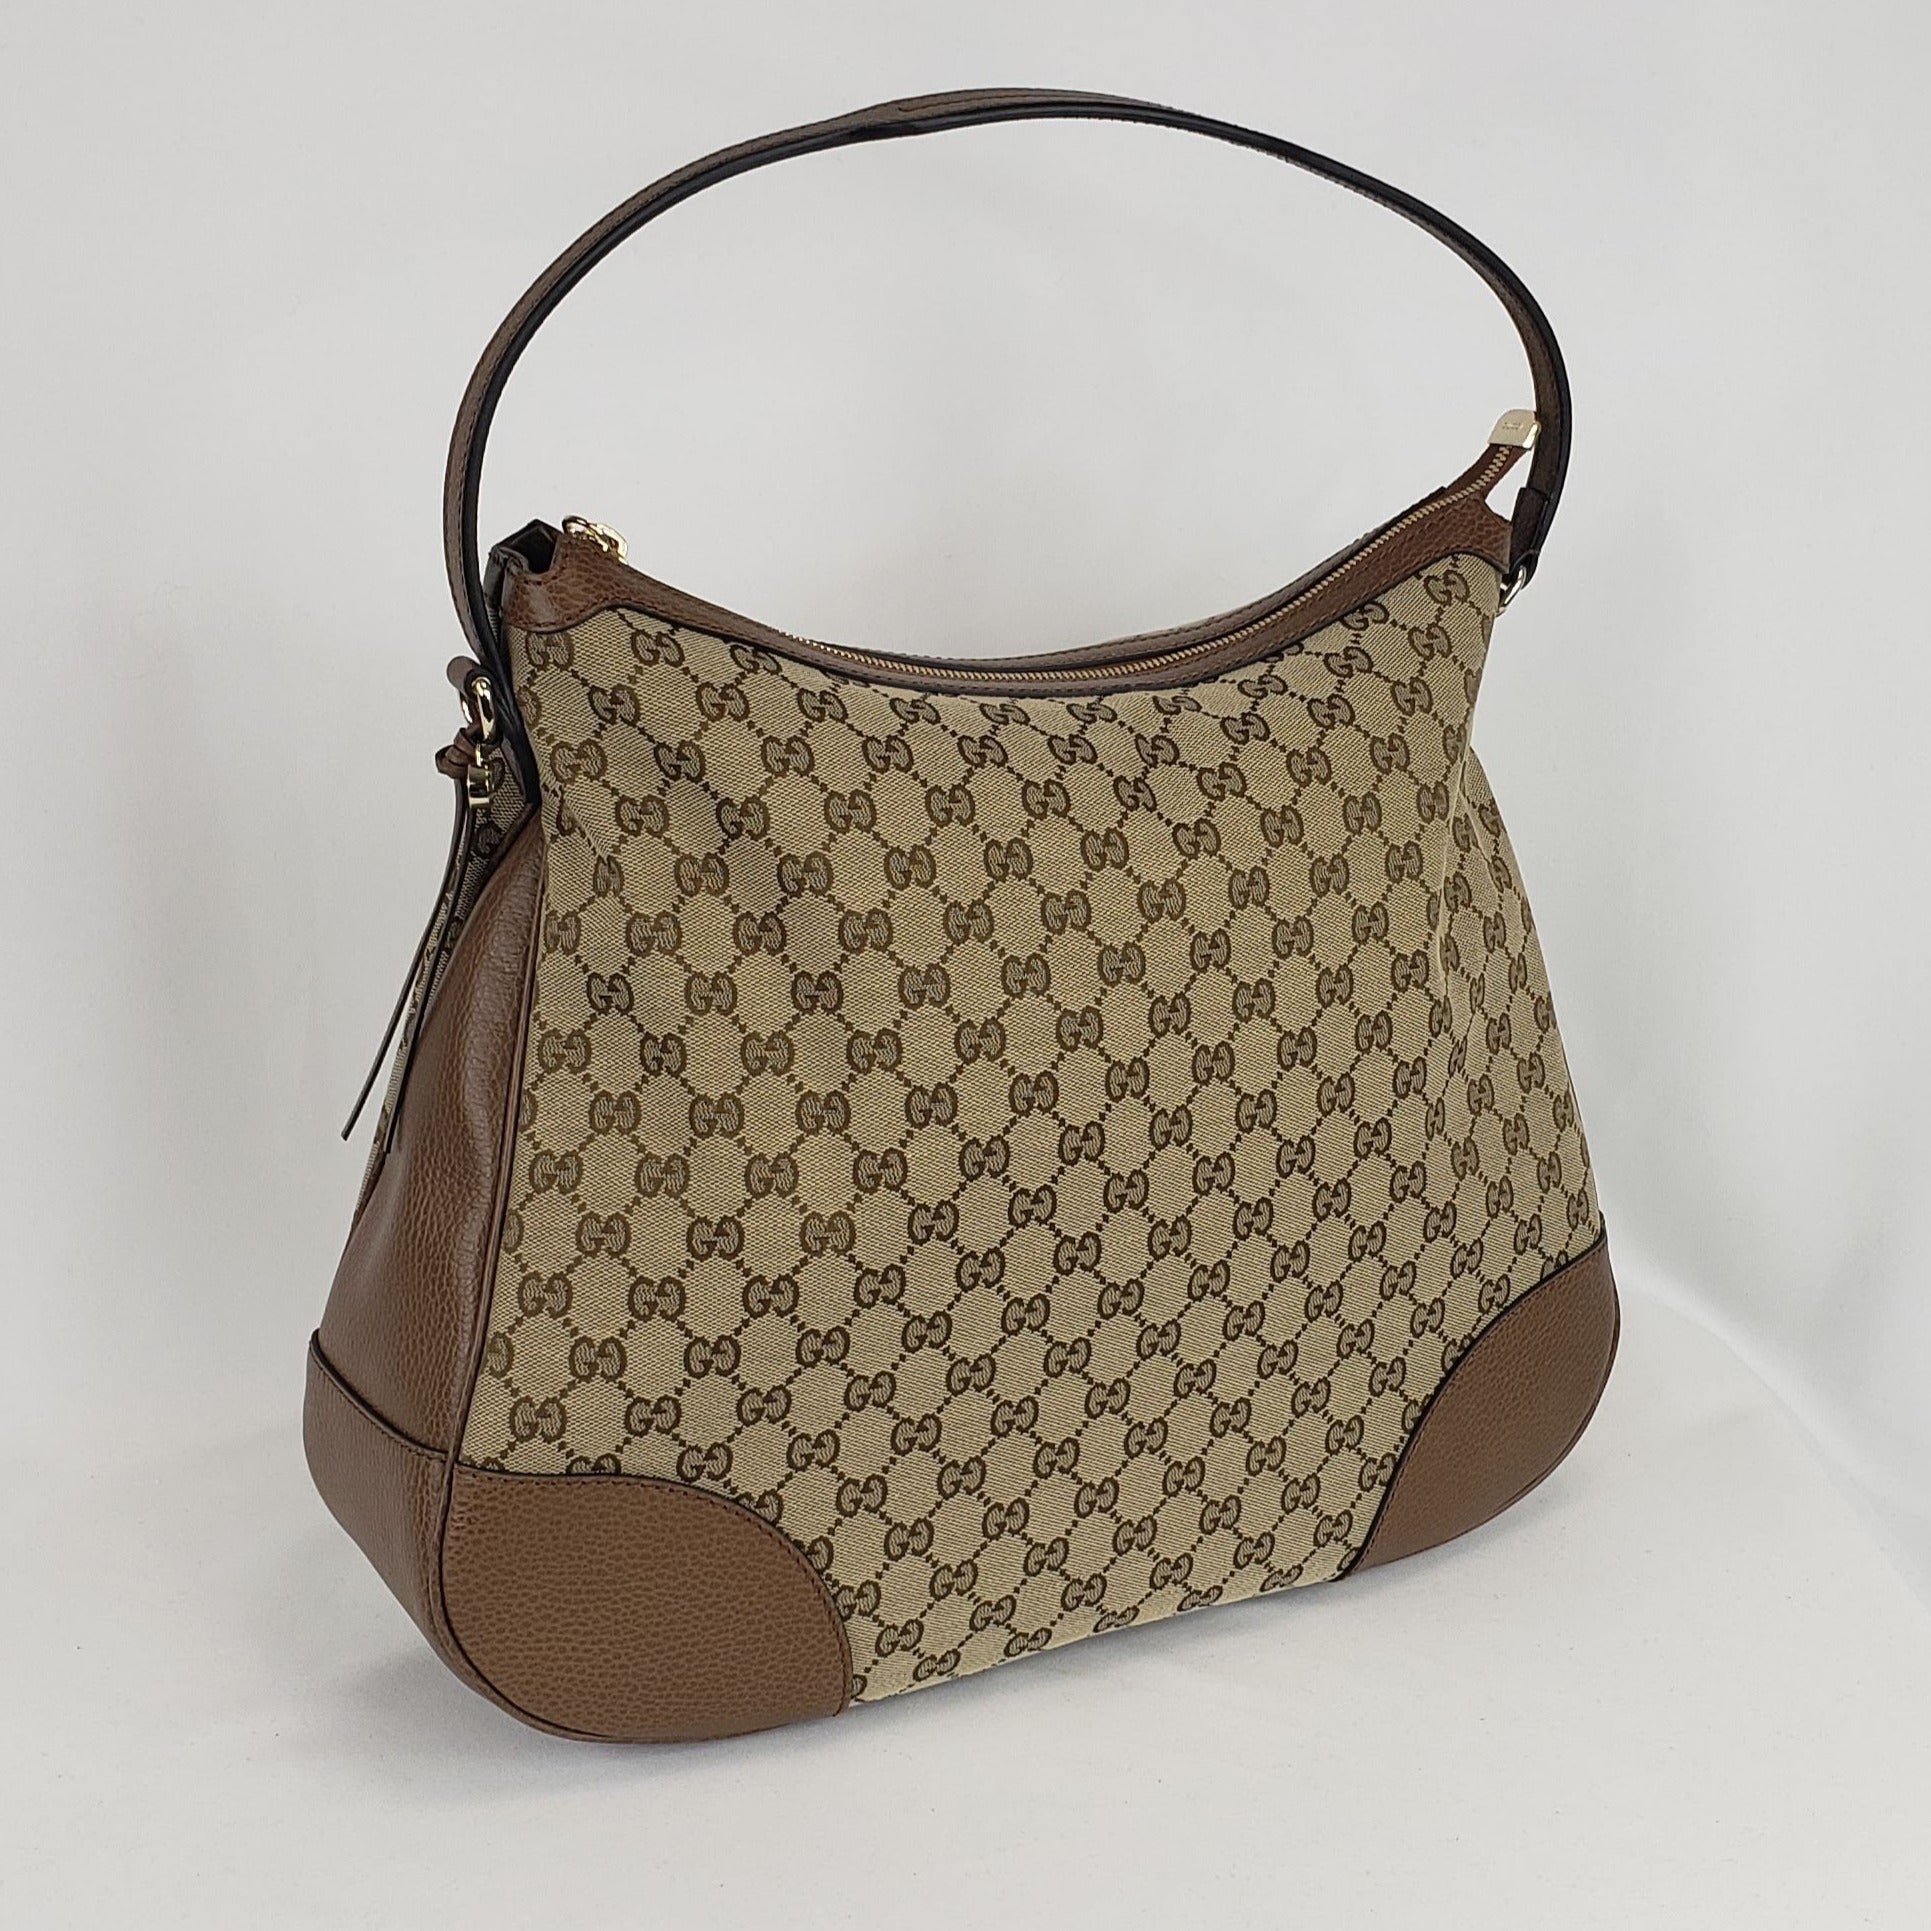 Gucci GG Supreme Large Hobo in Natural